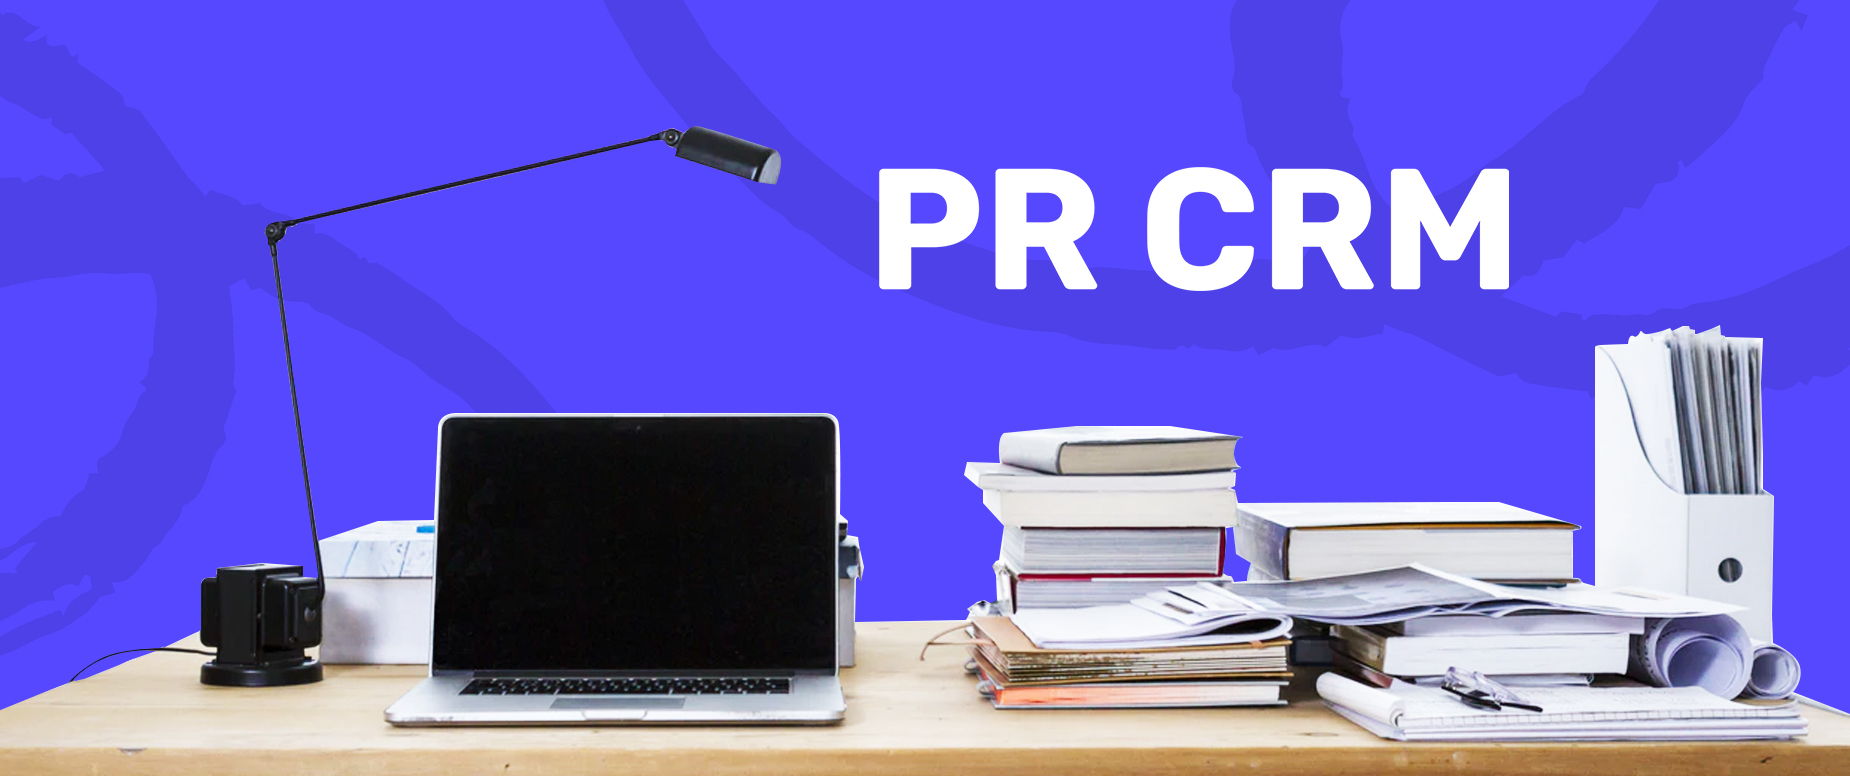 Academy: CRM for PR: 20+ PR tools to help manage your media relations